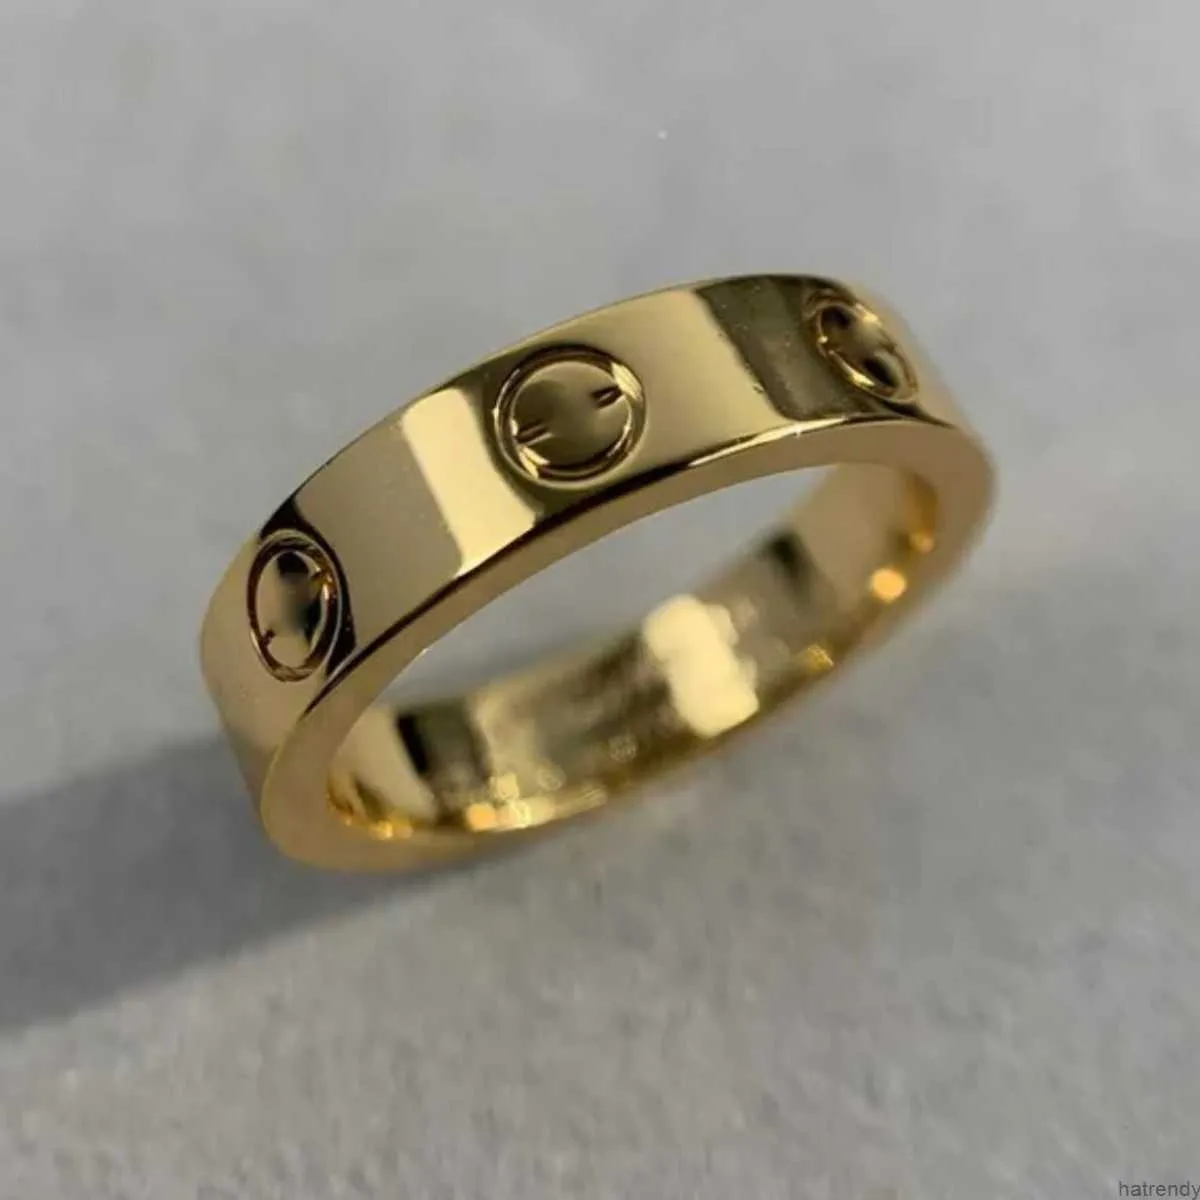 Original Engrave 6mm Diamond Love Ring 18k Gold Silver Rose 316l Stainless Steel Rings Women Men Lovers Wedding Jewelry Lady Party 6 7 8 9 10 11 12 Big Usa Size Al5d